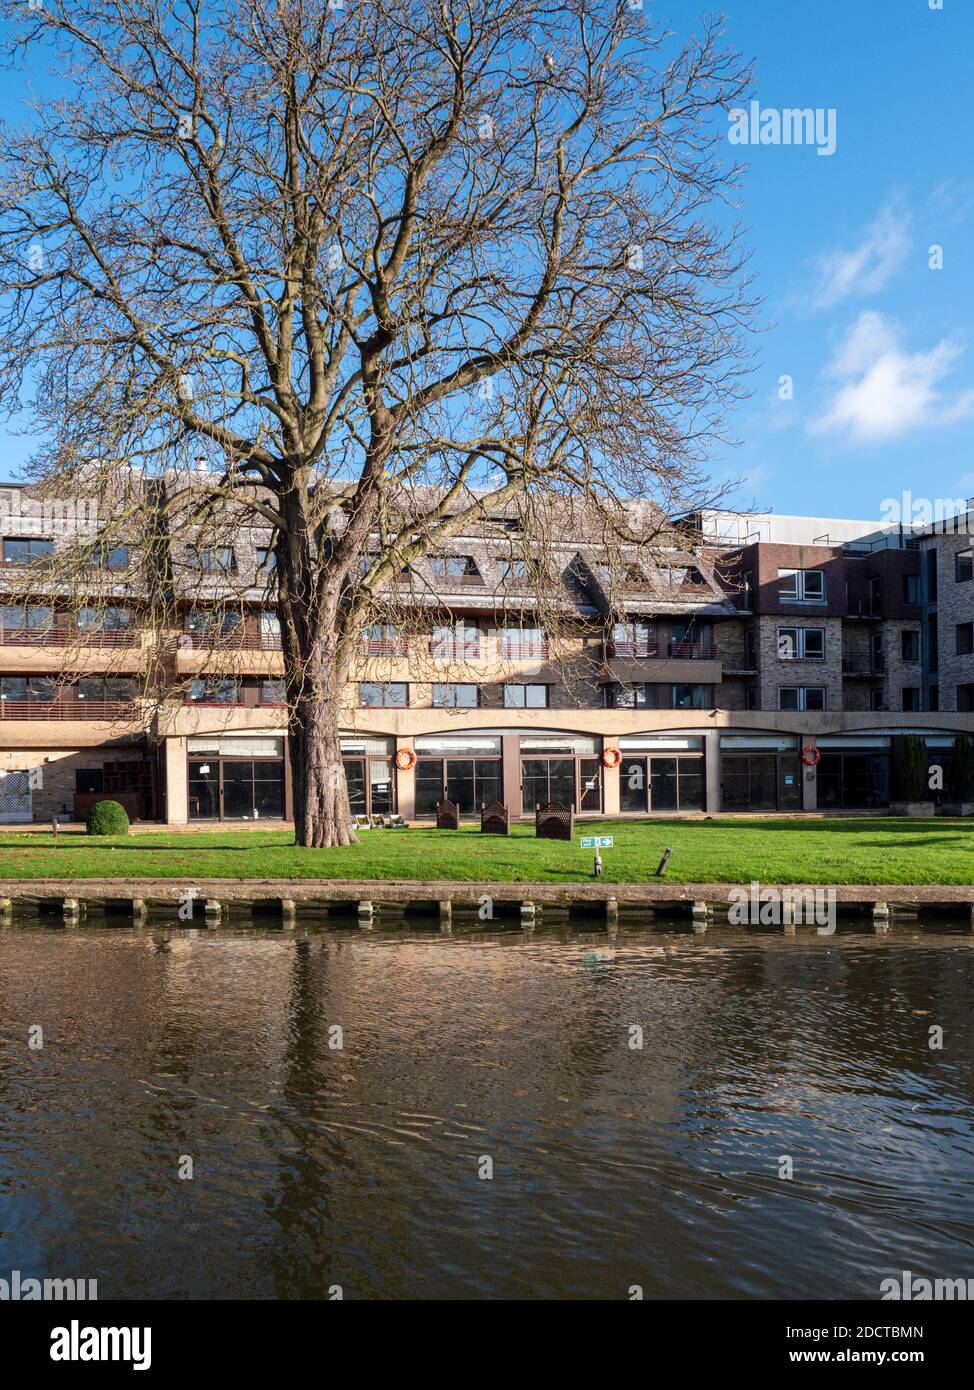 The Doubletree Hotel Cambridge UK on the banks of the River Cam Stock Photo